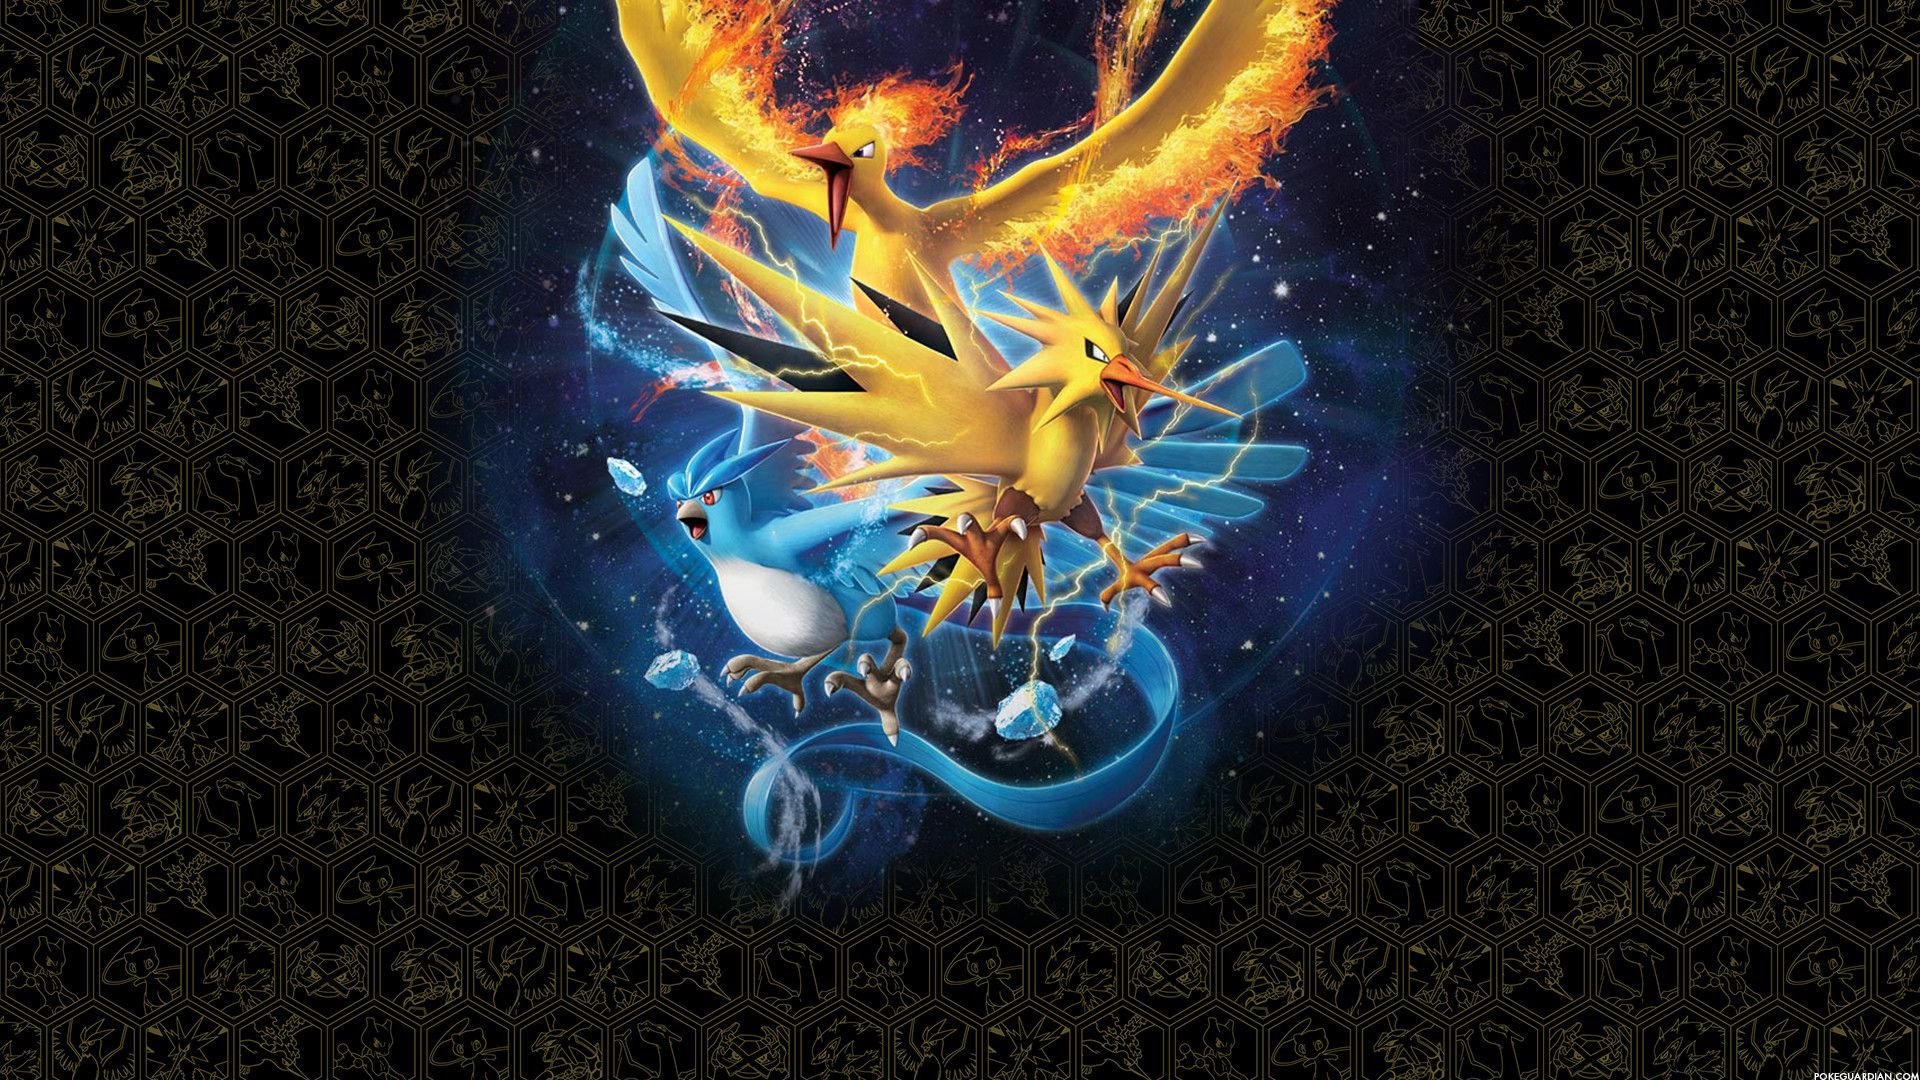 Hidden Fates Wallpaper. PokeGuardian. We Bring You the Latest Pokémon TCG News Every Day!